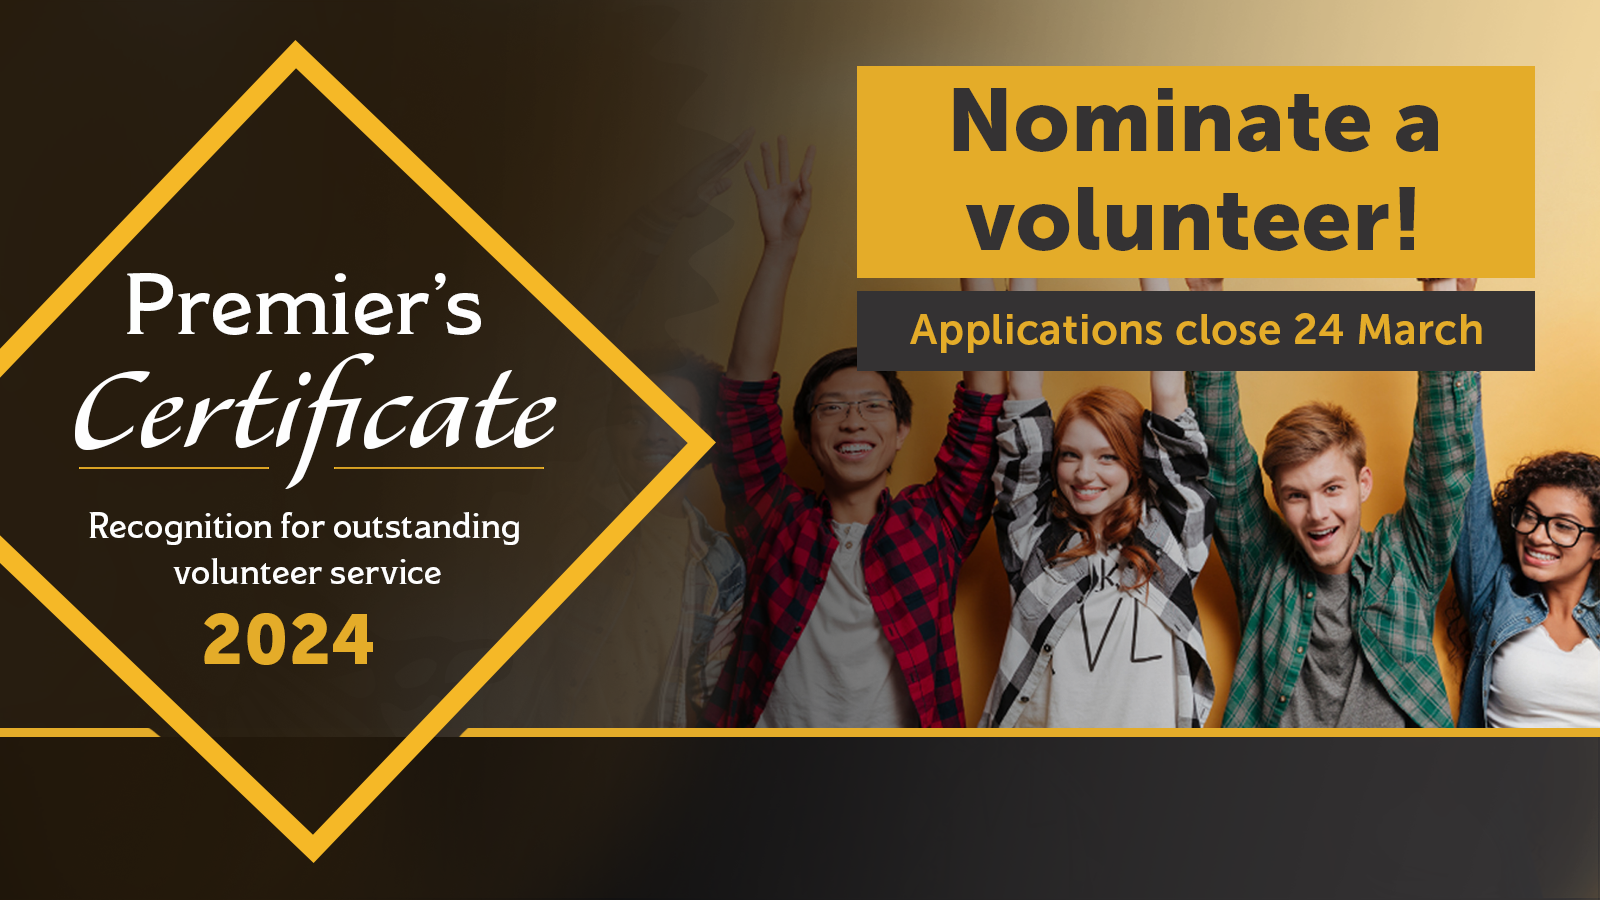 Nominate a Volunteer, applications close 24 March.